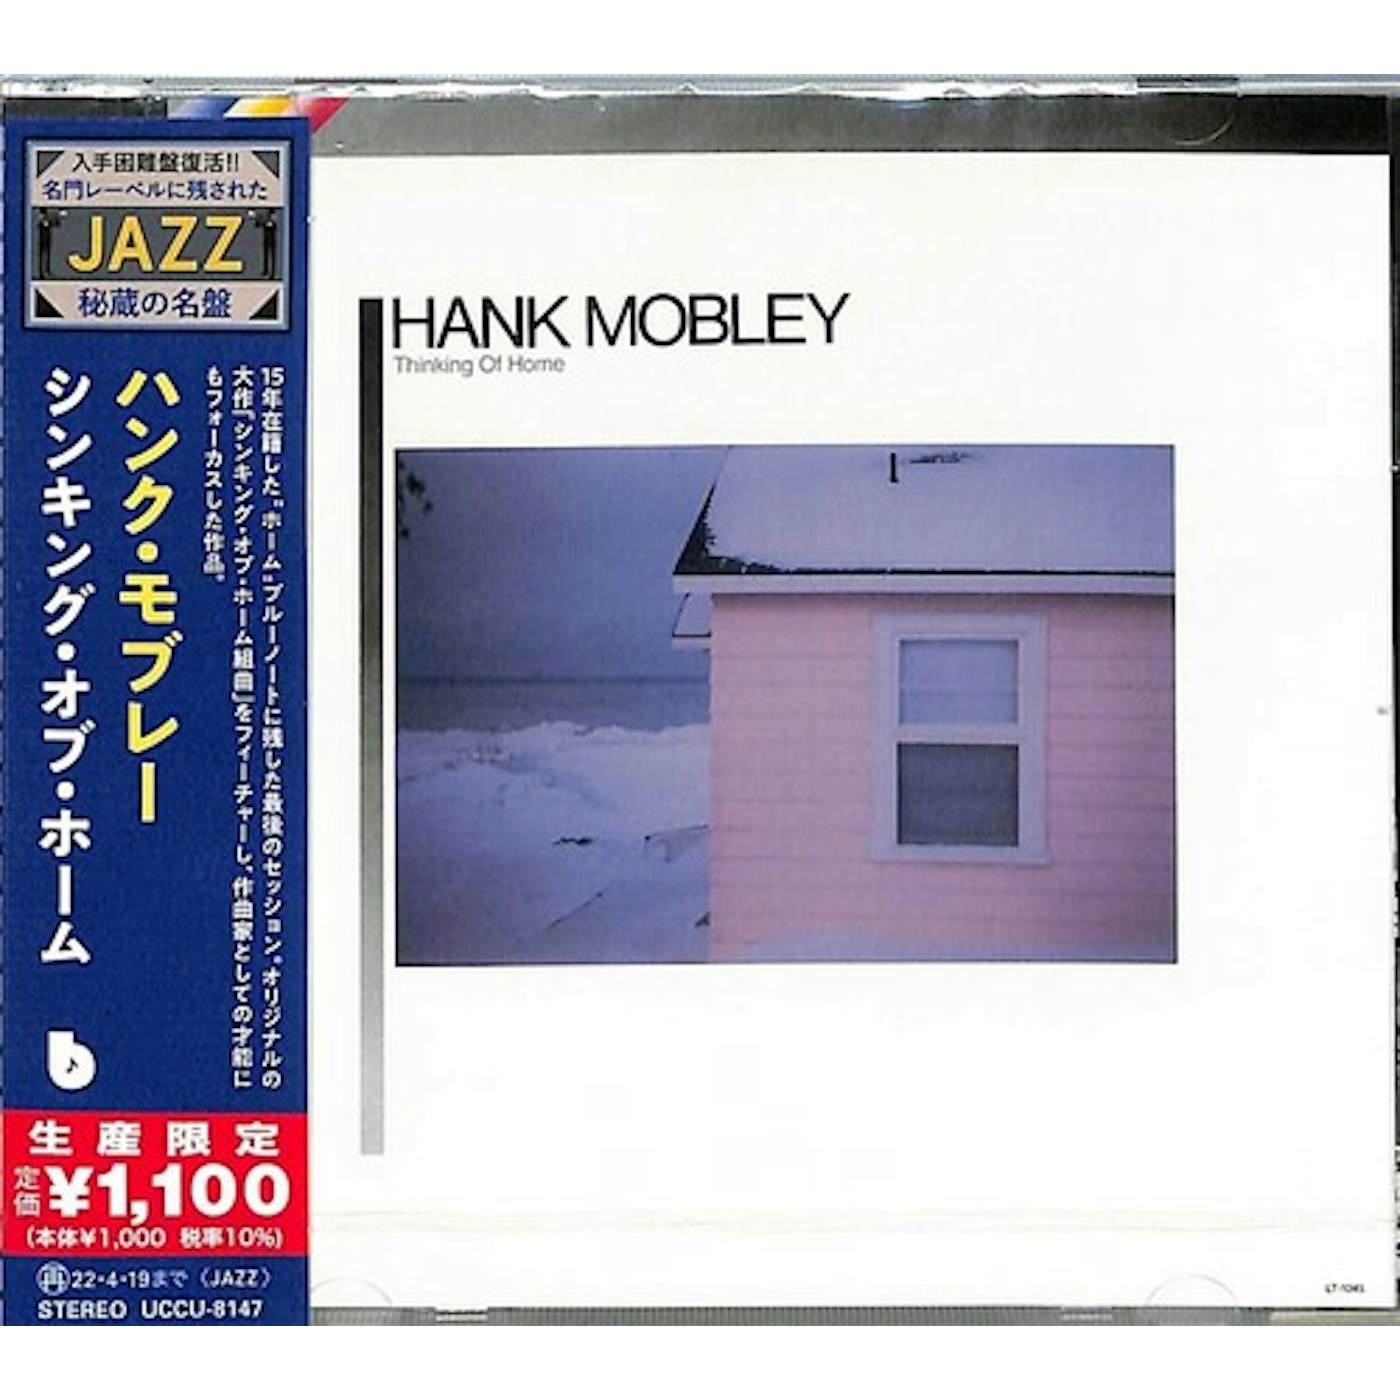 Hank Mobley THINKING OF HOME CD